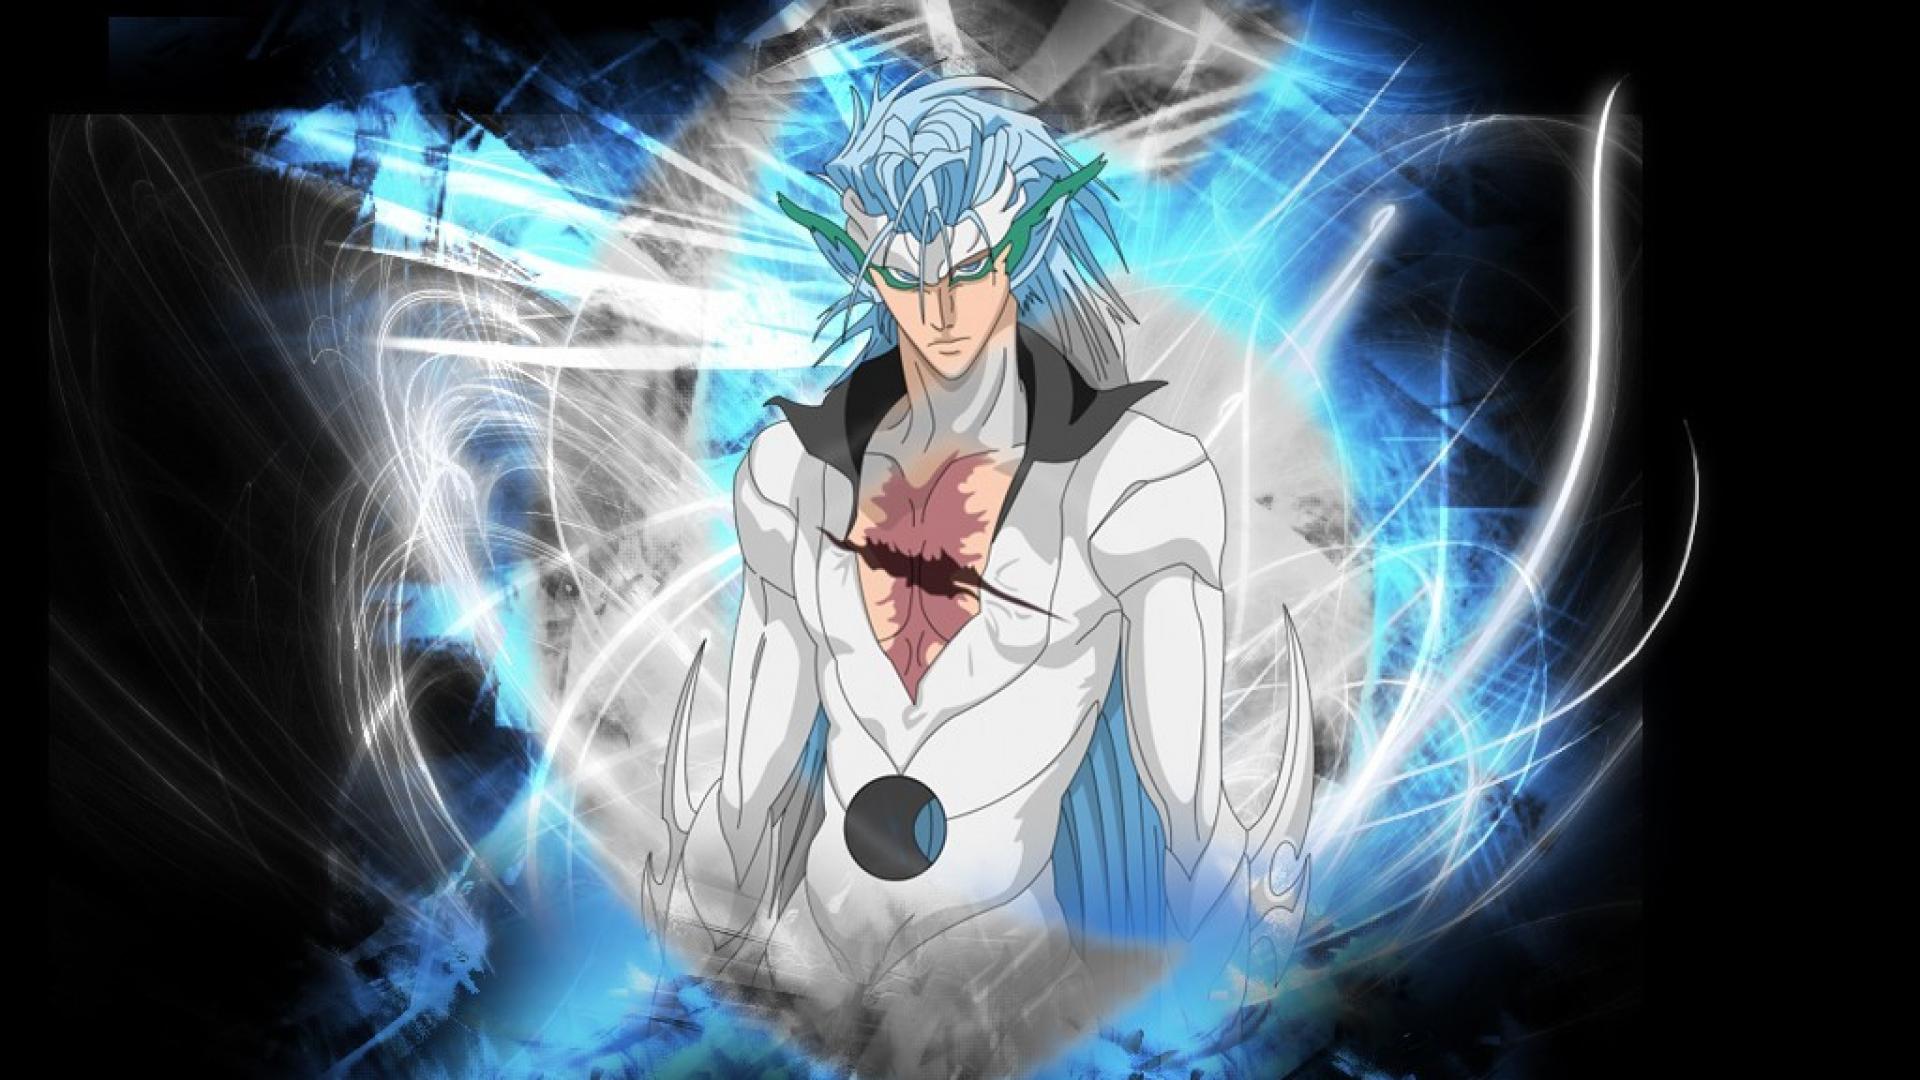 Some Grimmjow wallpaper I made if yall want  rbleach